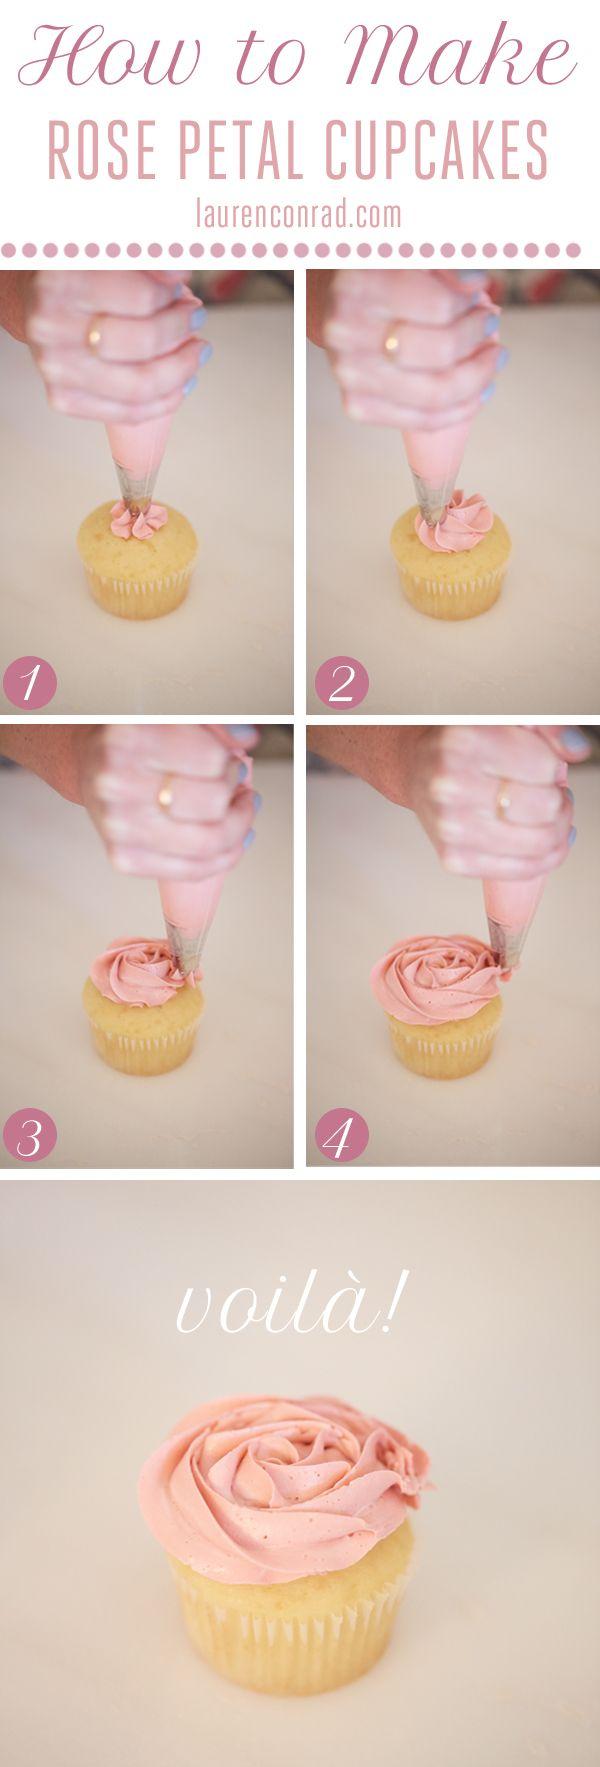 Wedding - Edible Obsession: How To Make Rose Cupcakes